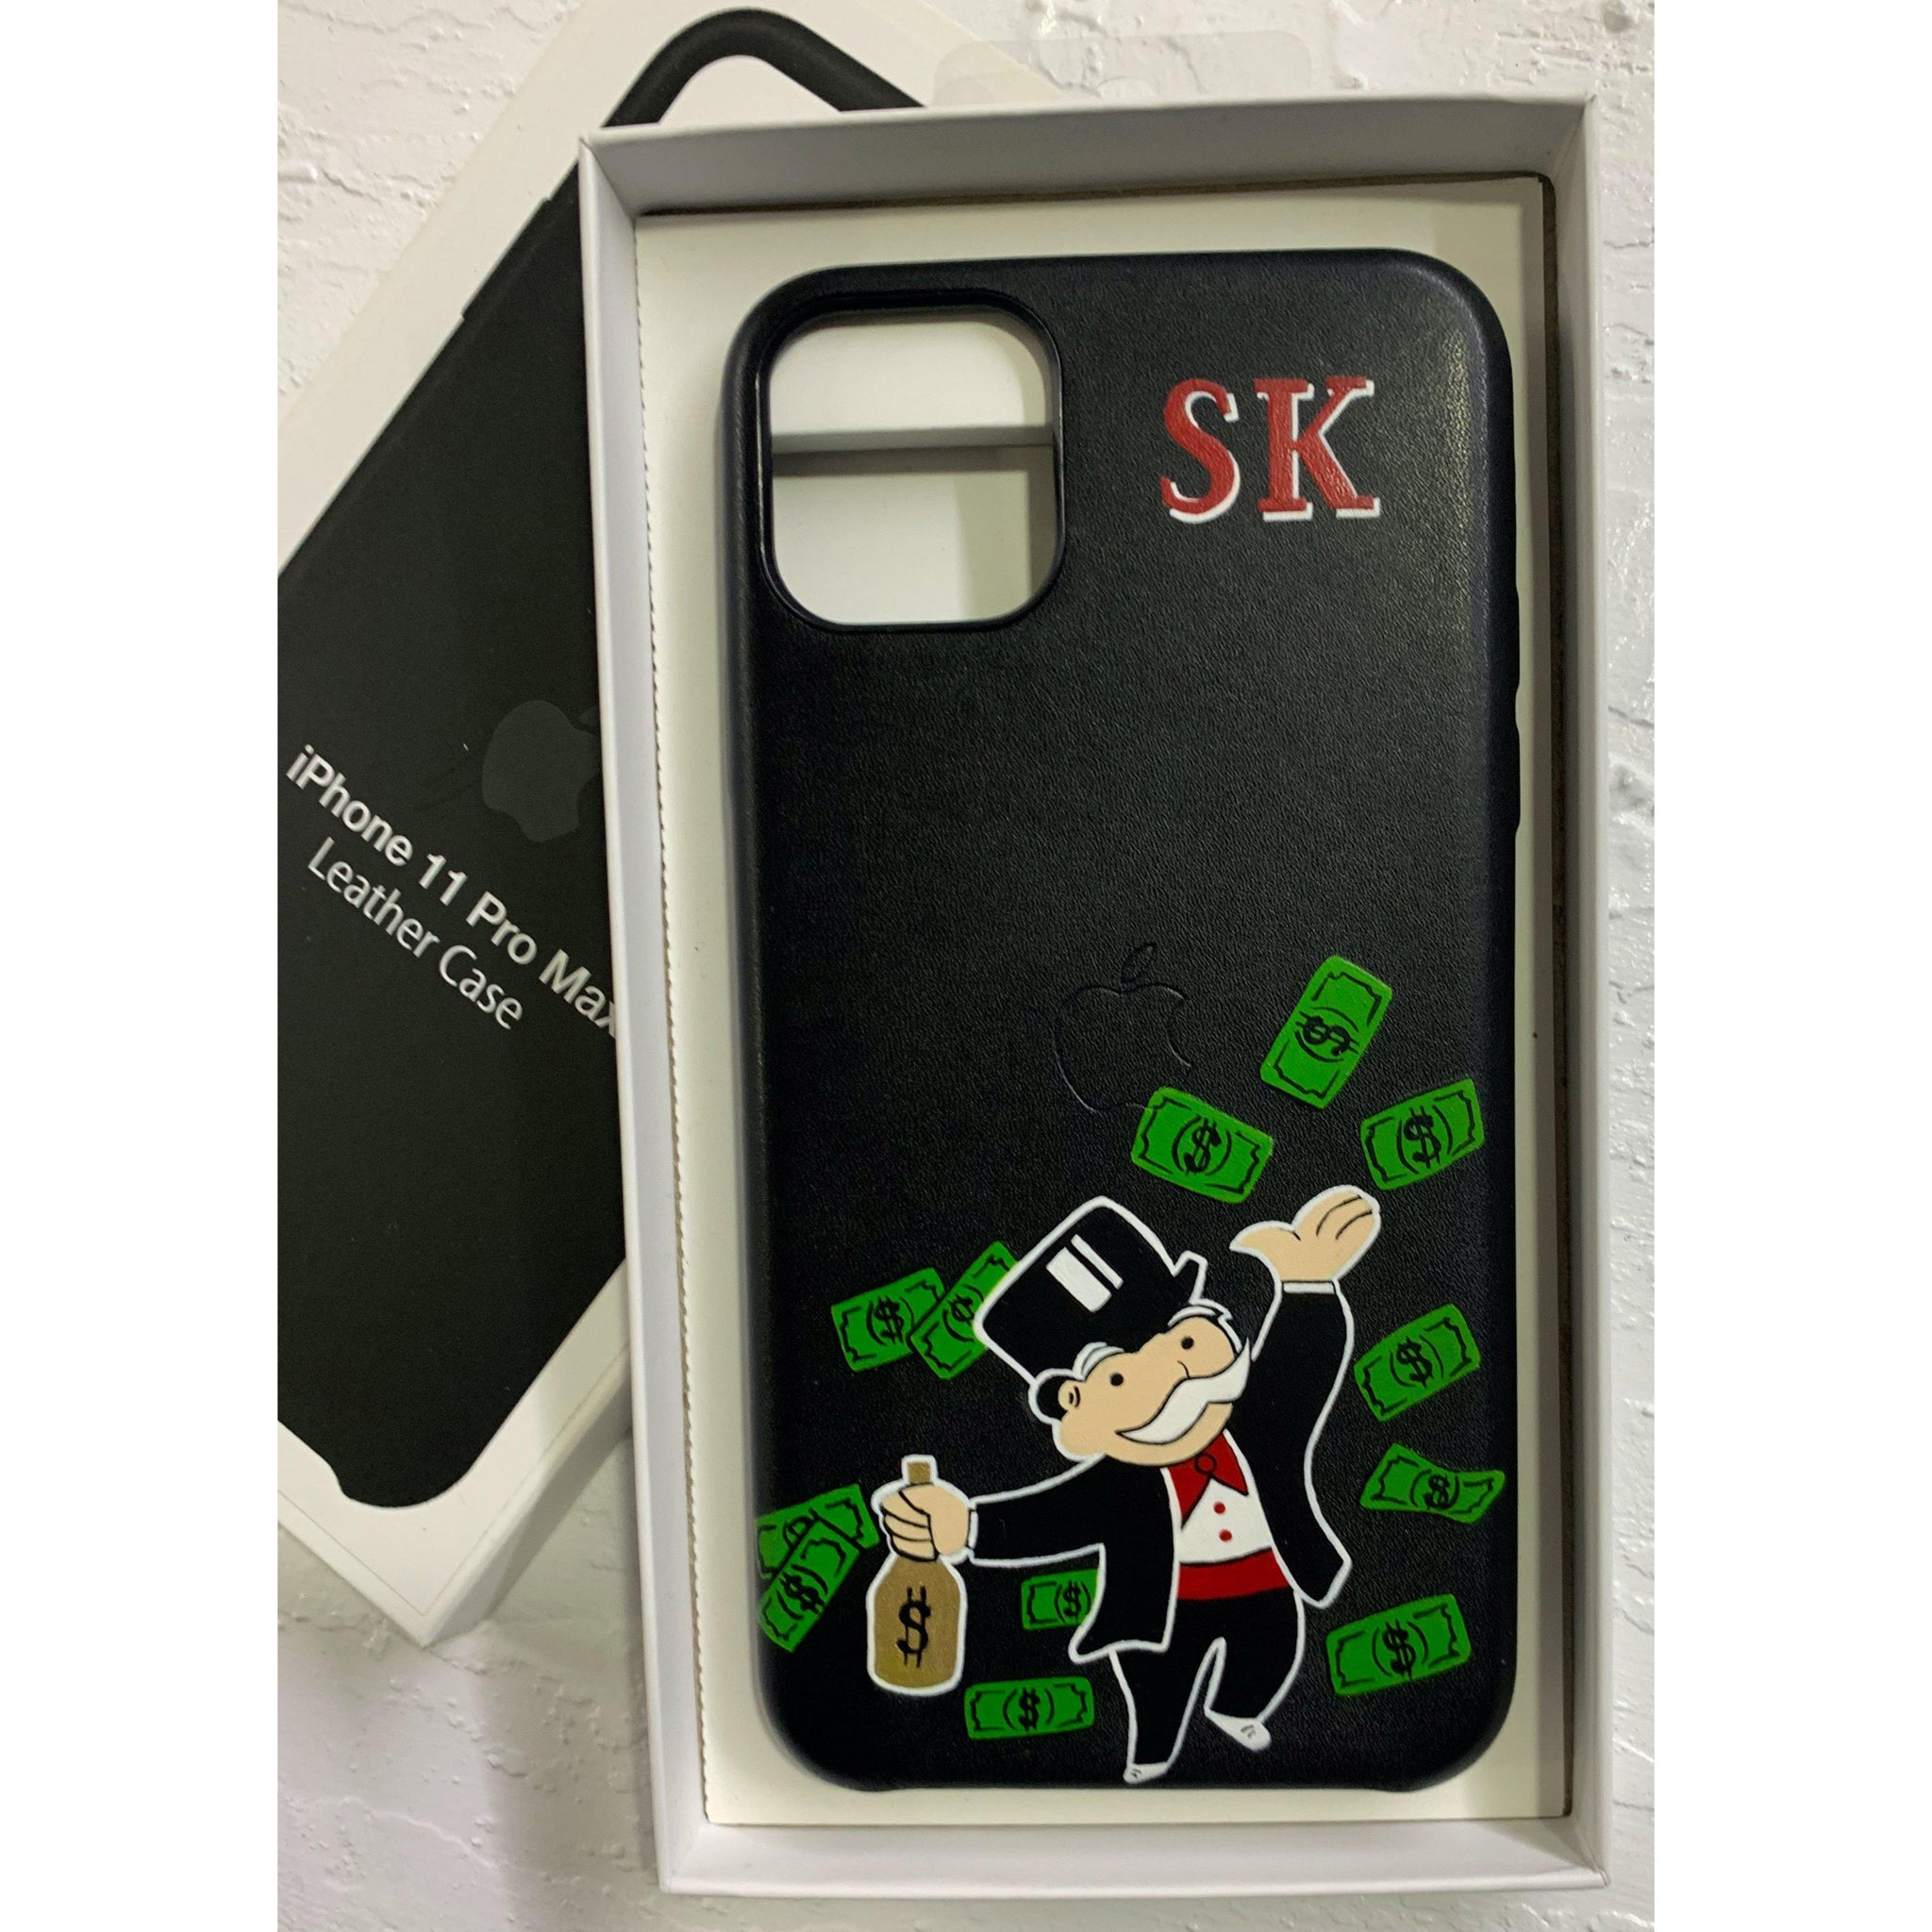 Personalised Leather iPhone 11 Case